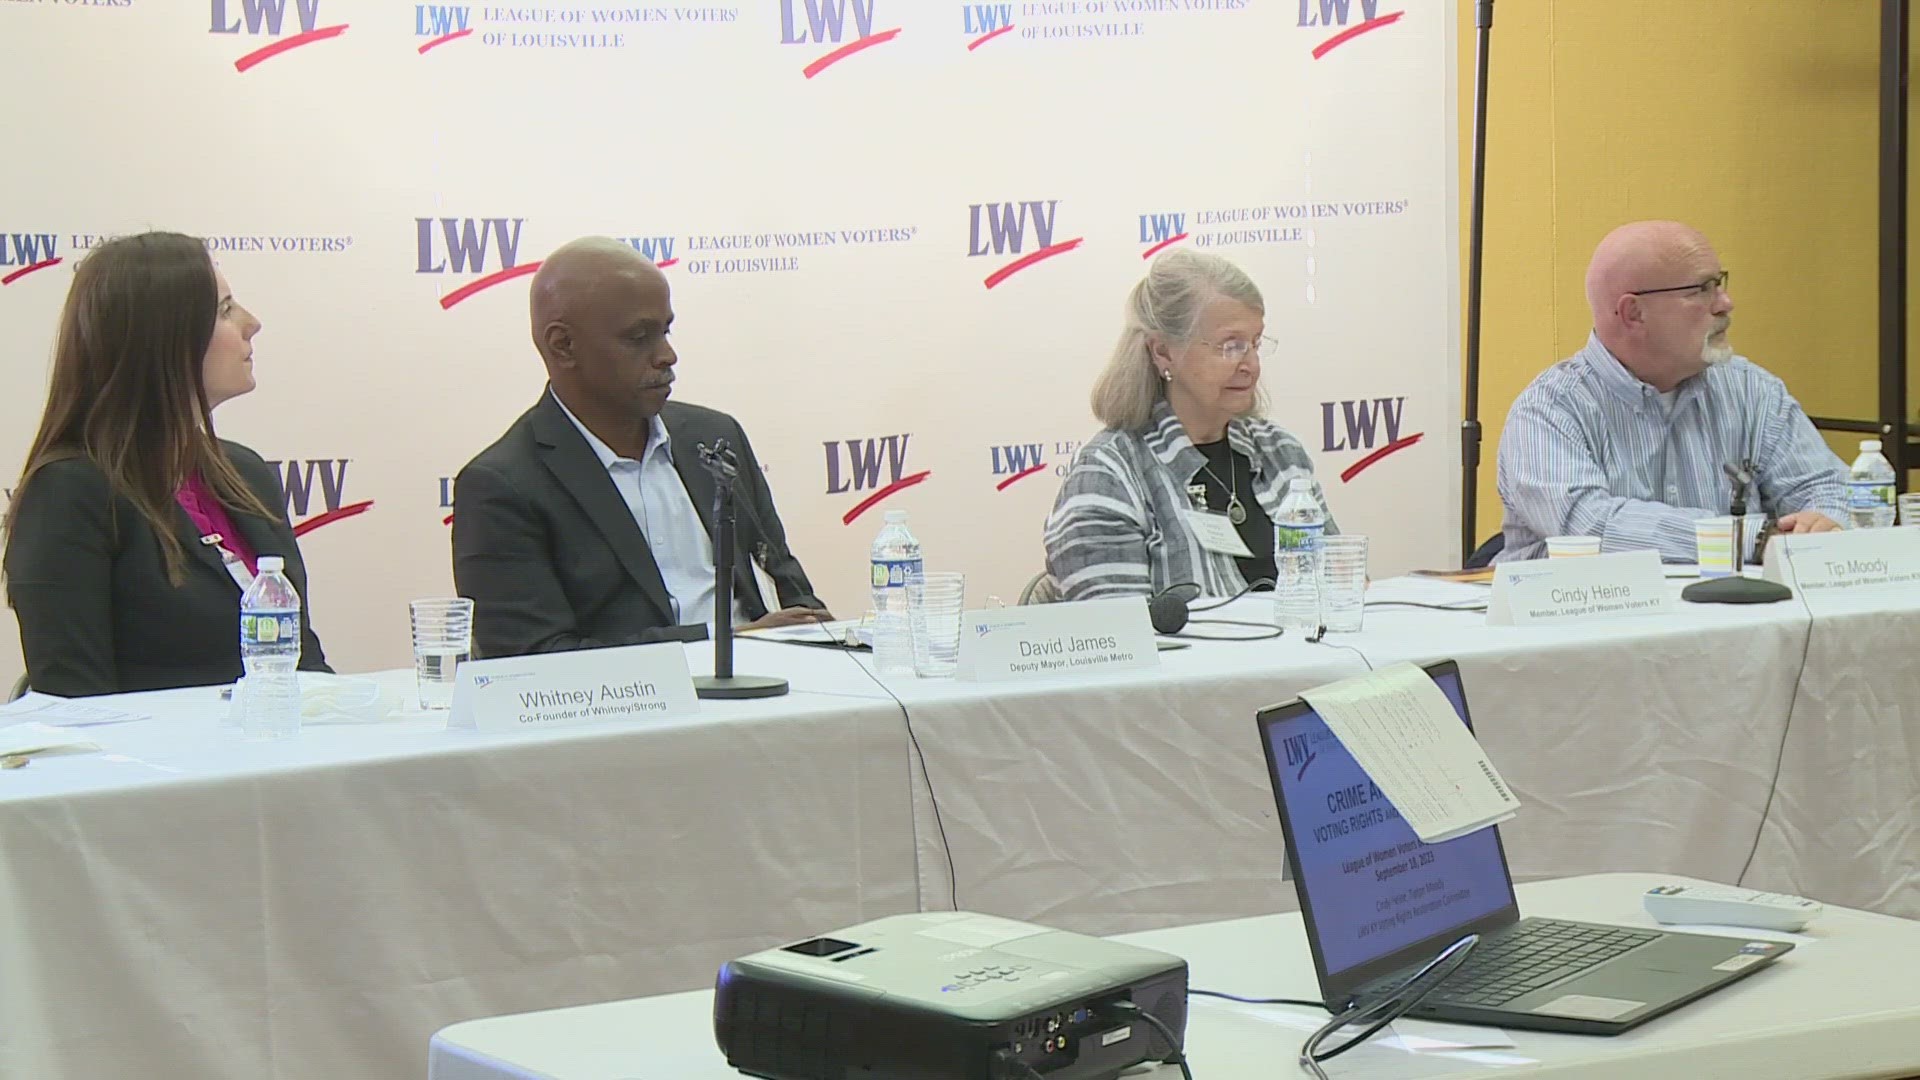 The League of Women Voters of Louisville hosted the panel.